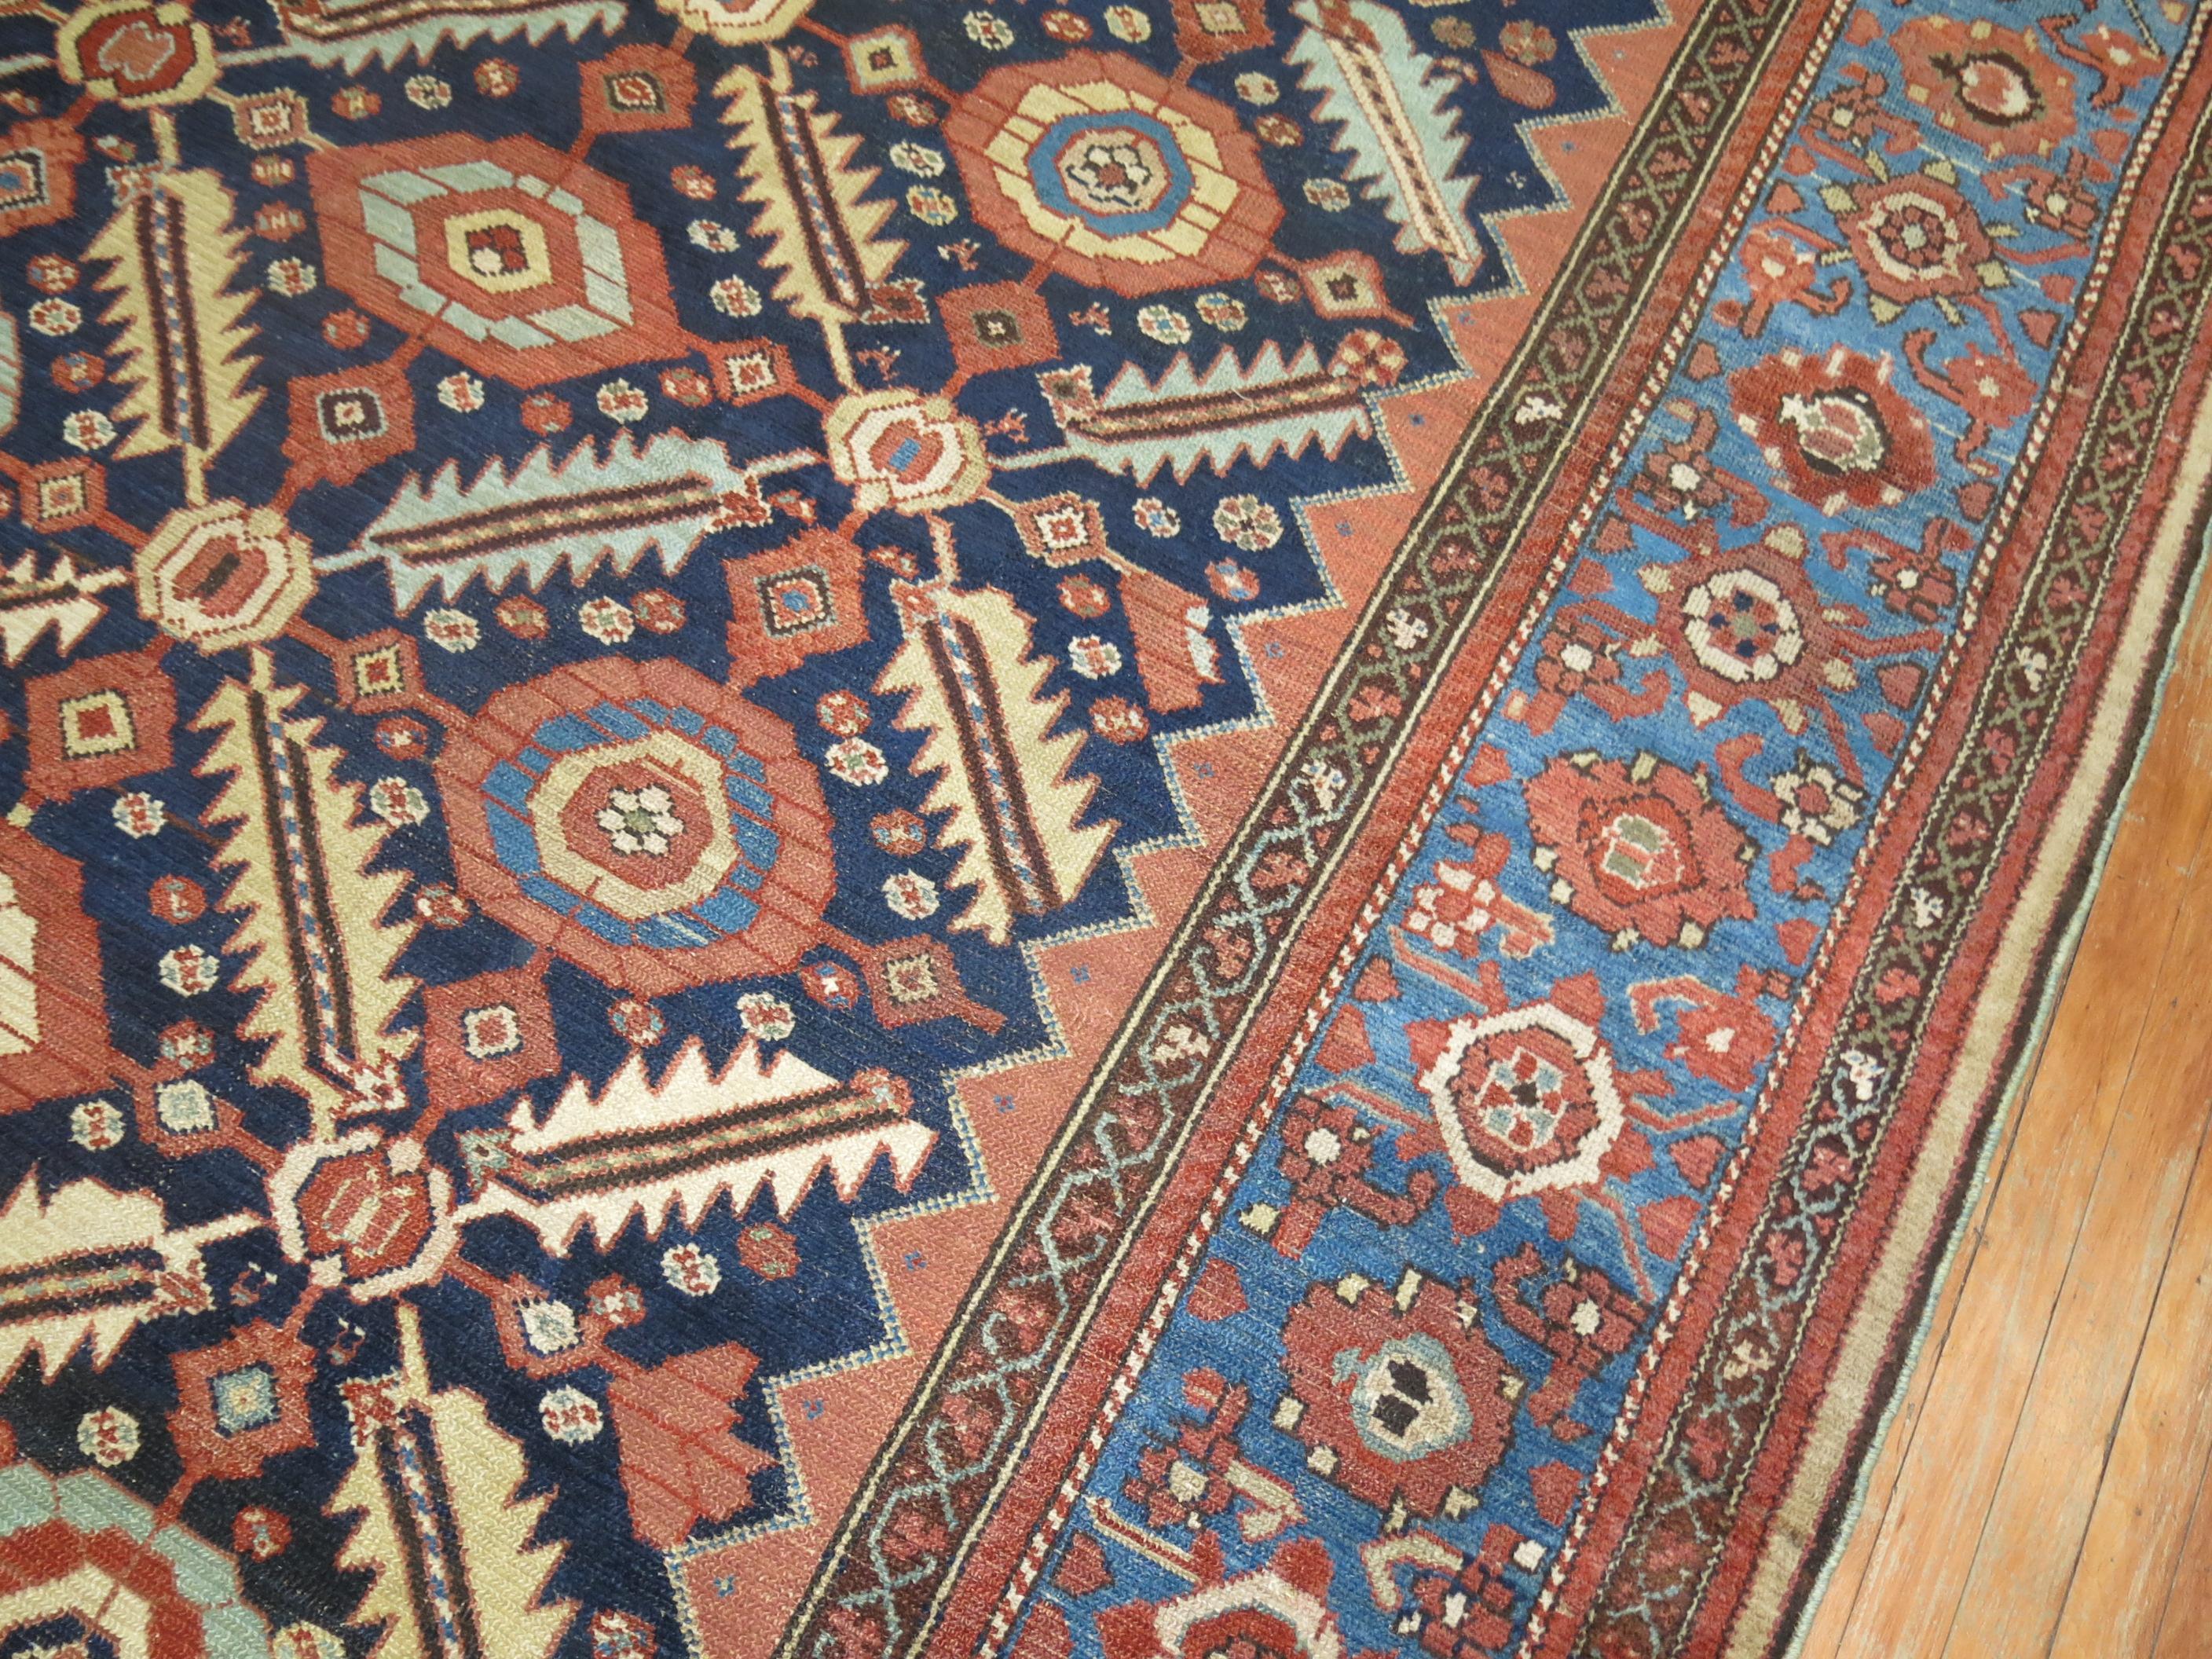 
an early 20th Century Persian Malayer Tribal Rug

Details
rug no.	9259
size	10' 1